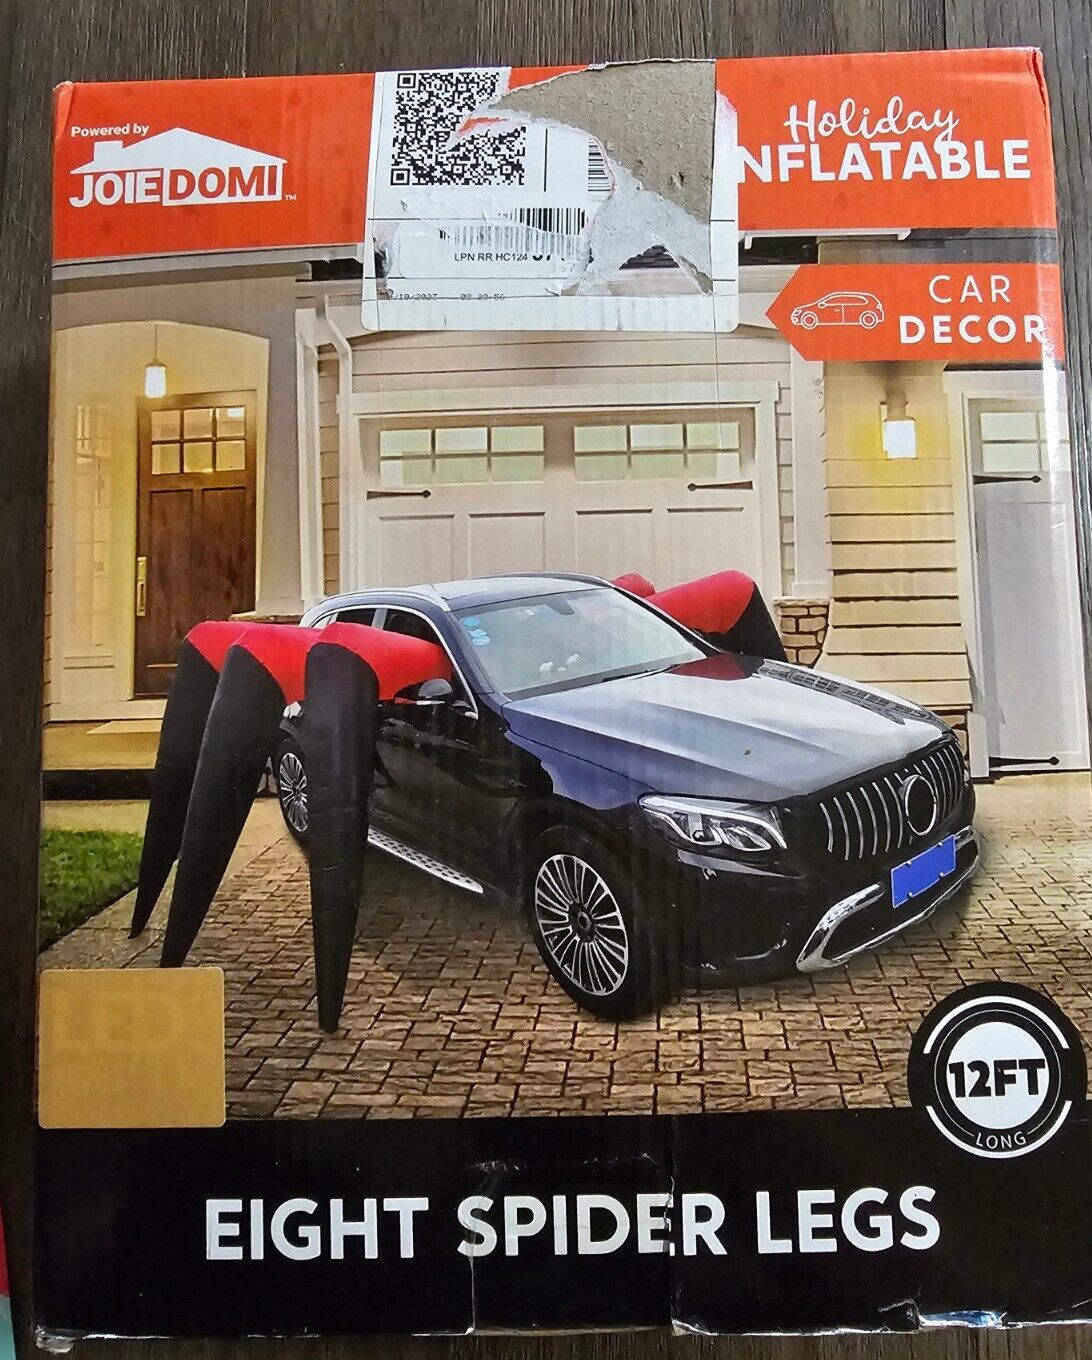 Joiedomi 12 FT Long Halloween Inflatable Spider Legs, Car Decorations Kit